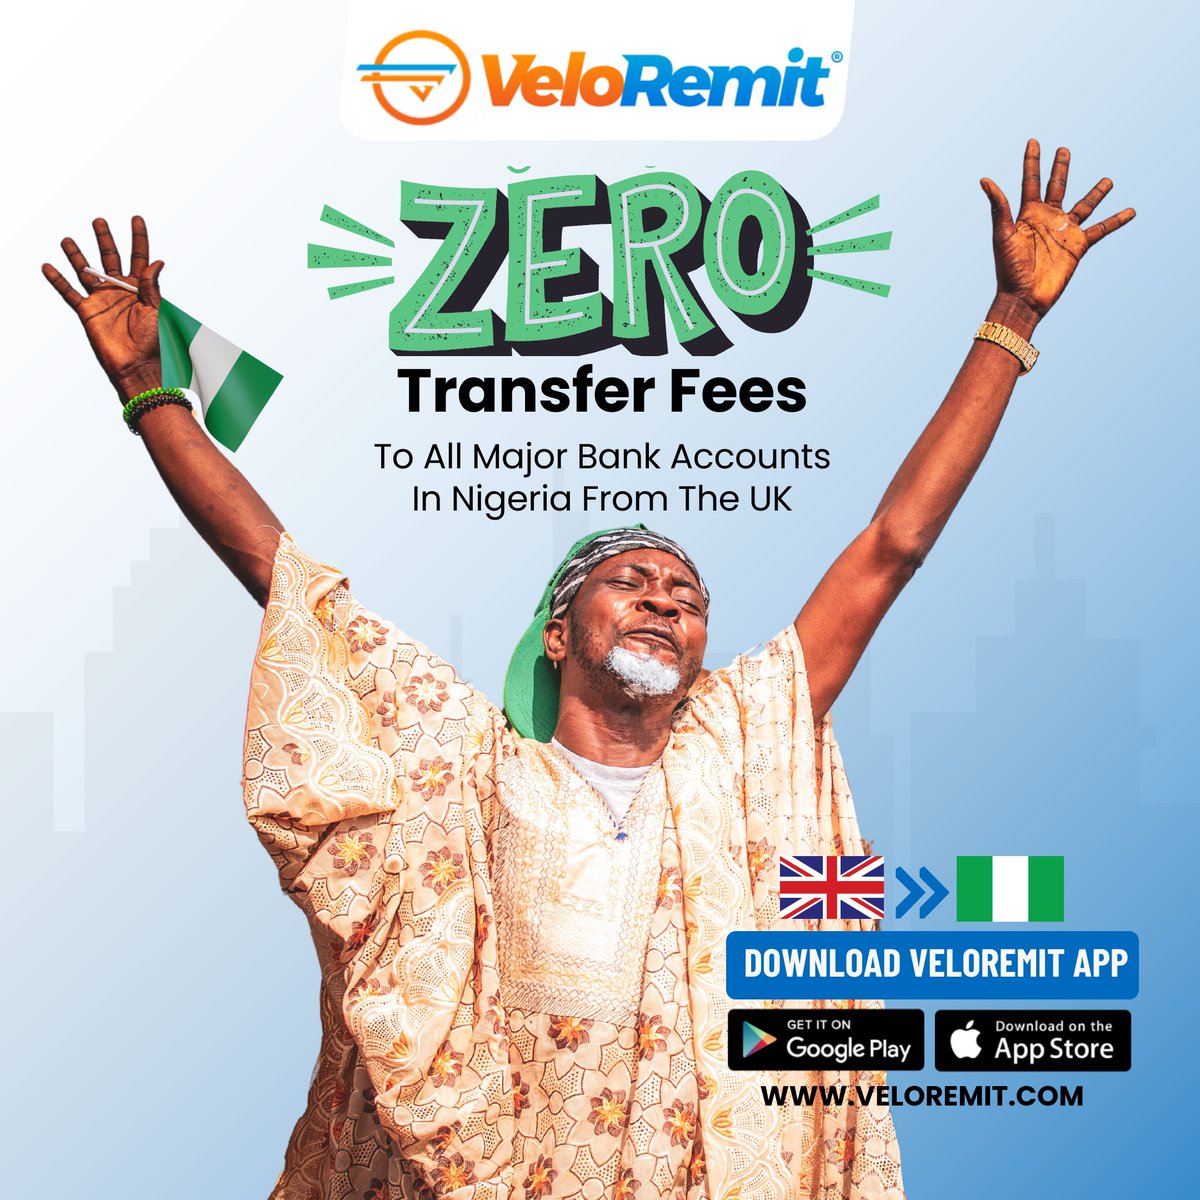 🚀Send money to Nigeria with VeloRemit! 🇬🇧🇳🇬 Enjoy zero transfer fees, excellent rates,fast and secure transfers to major banks. Download now for a seamless experience! 💸✨ #veloremit #moneytransfer #zerofees #greatrates #fast #secure #etioba_velo✅ #nigeriansinuk #WeekendVibes